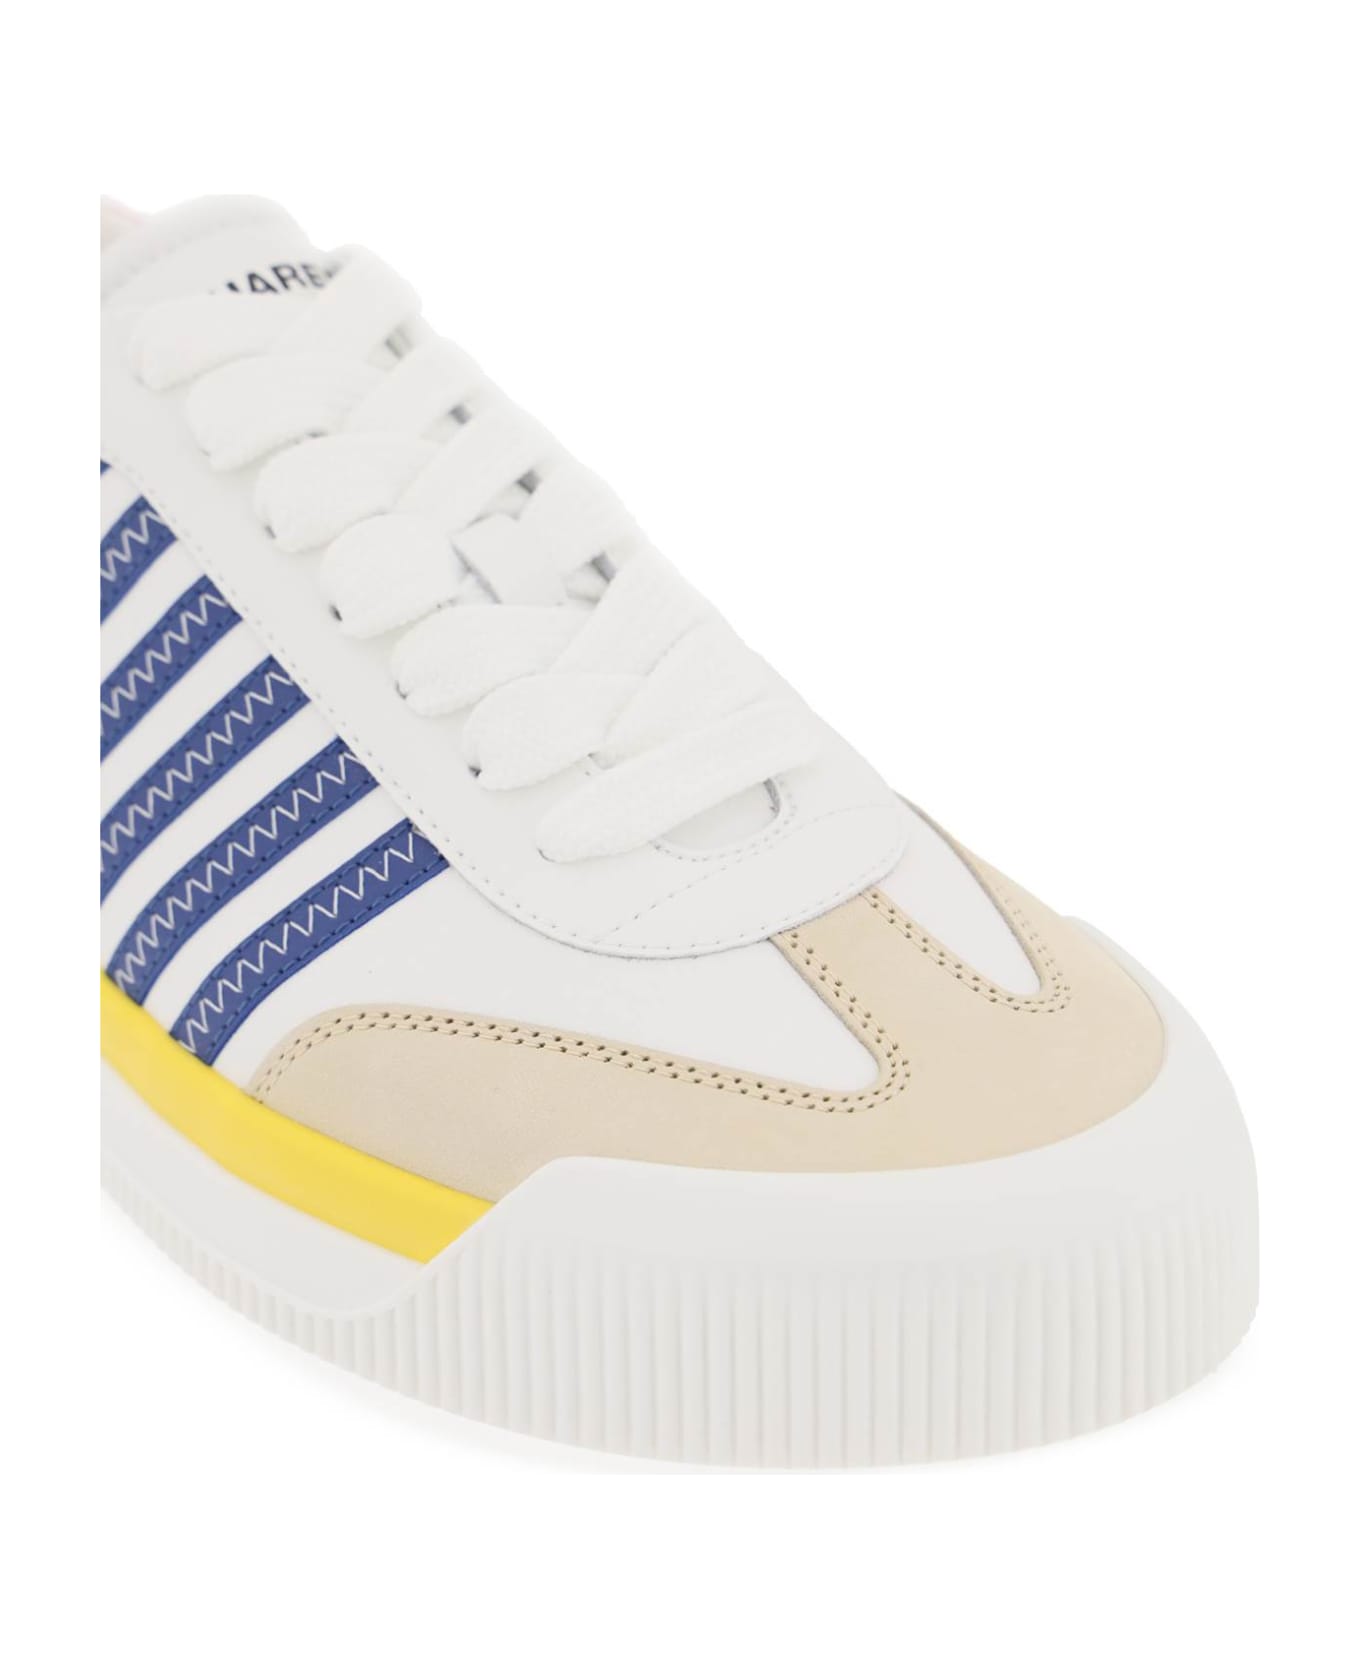 Dsquared2 New Jersey Sneakers - WHITE/YELLOW/BLUE